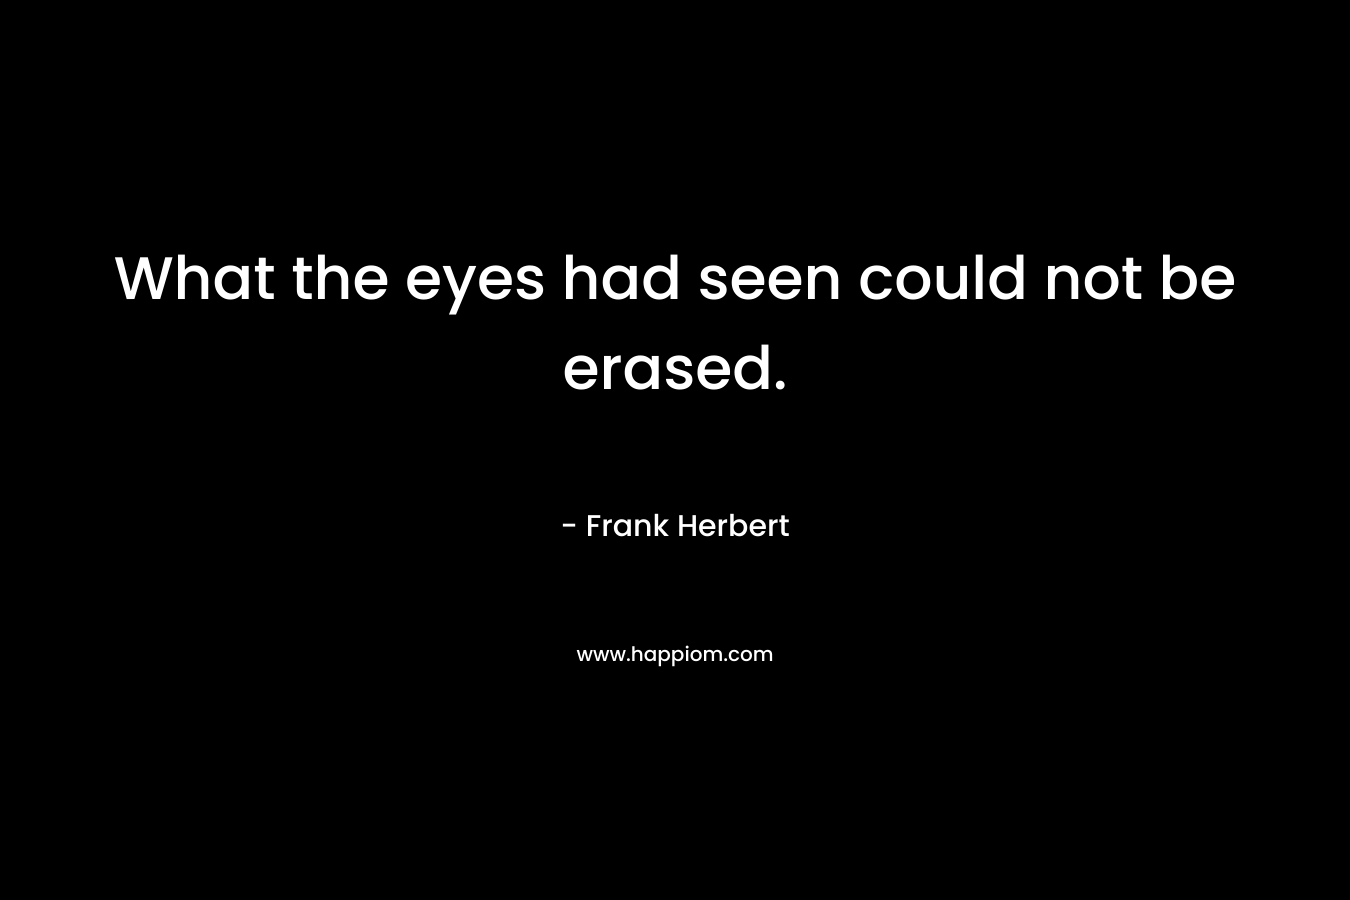 What the eyes had seen could not be erased. – Frank Herbert